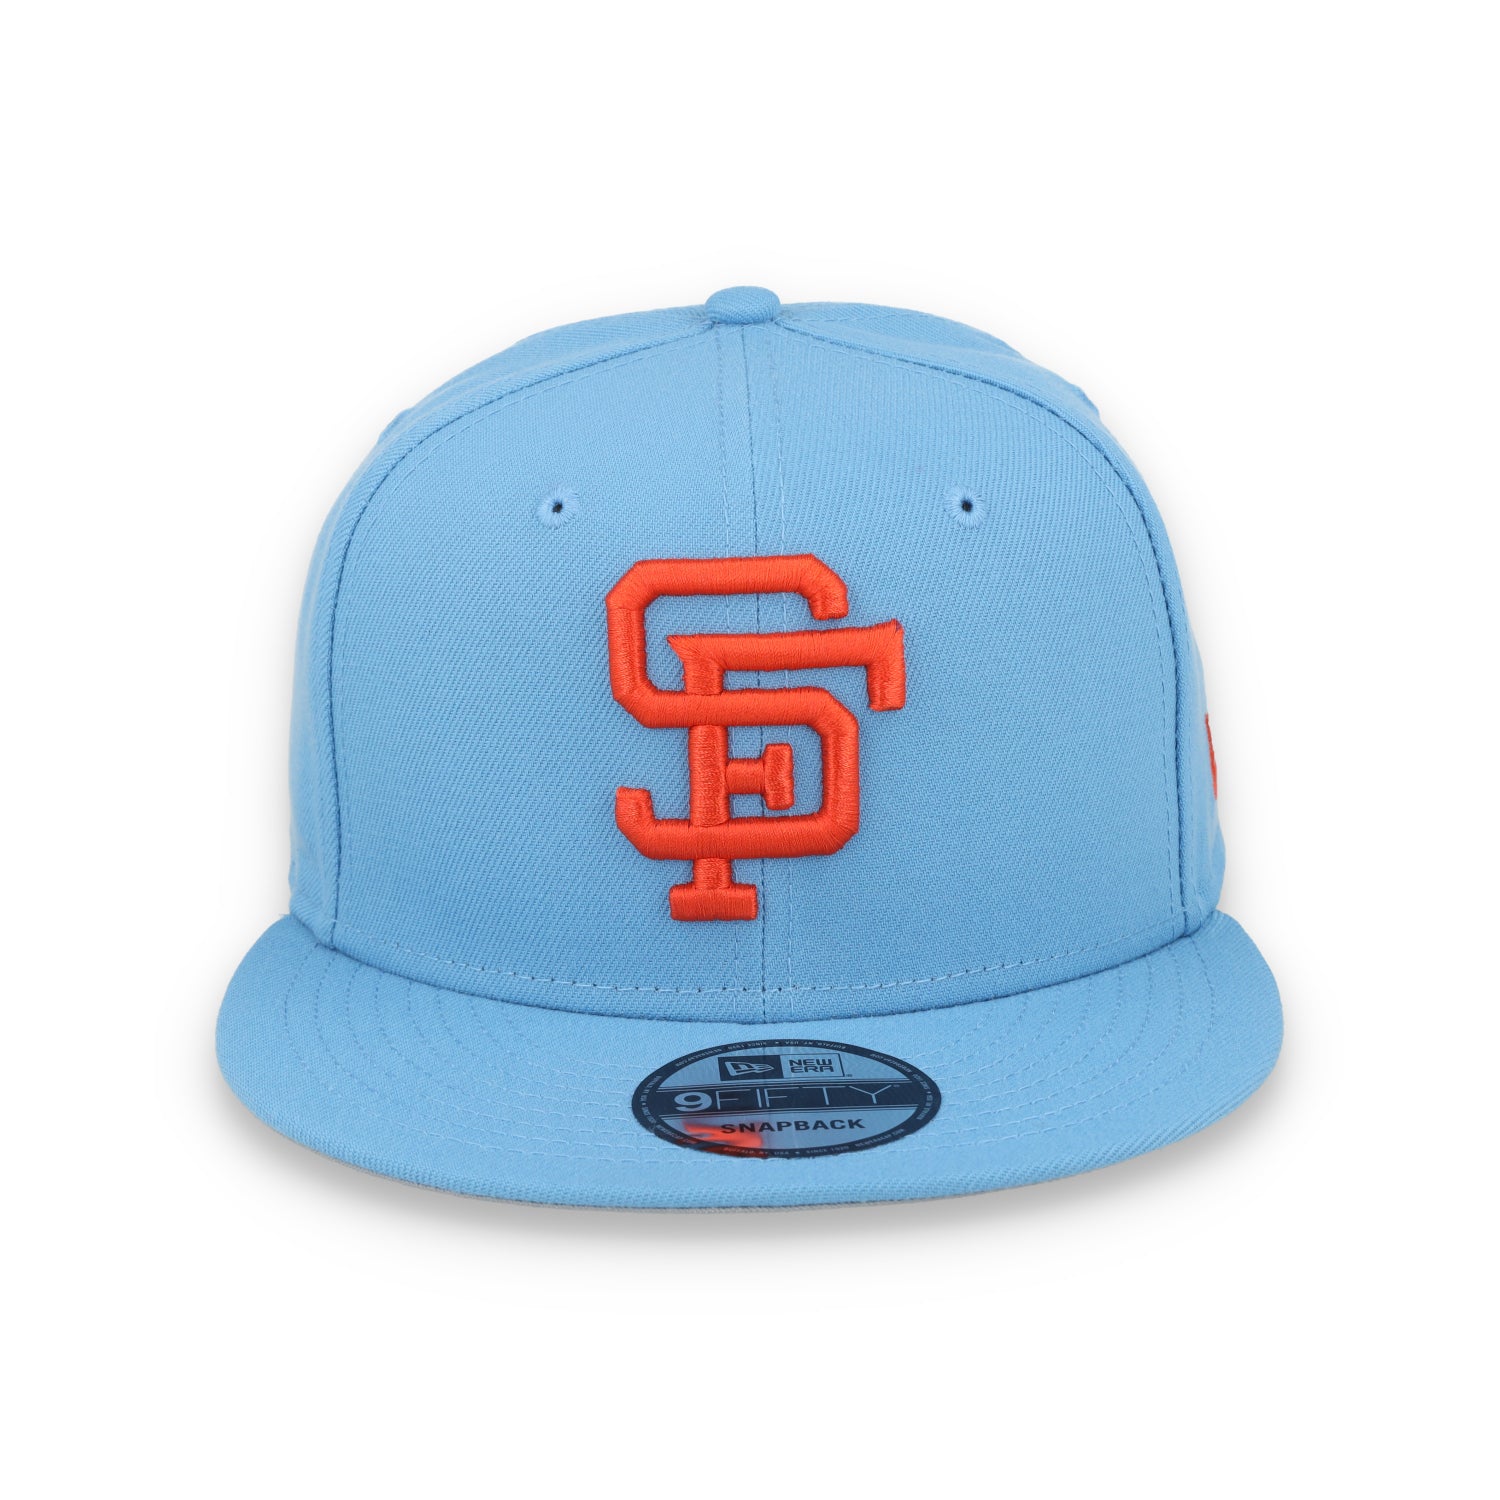 New Era San Francisco Giants Cooperstown Collection Evergreen 9FIFTY- Sky Blue